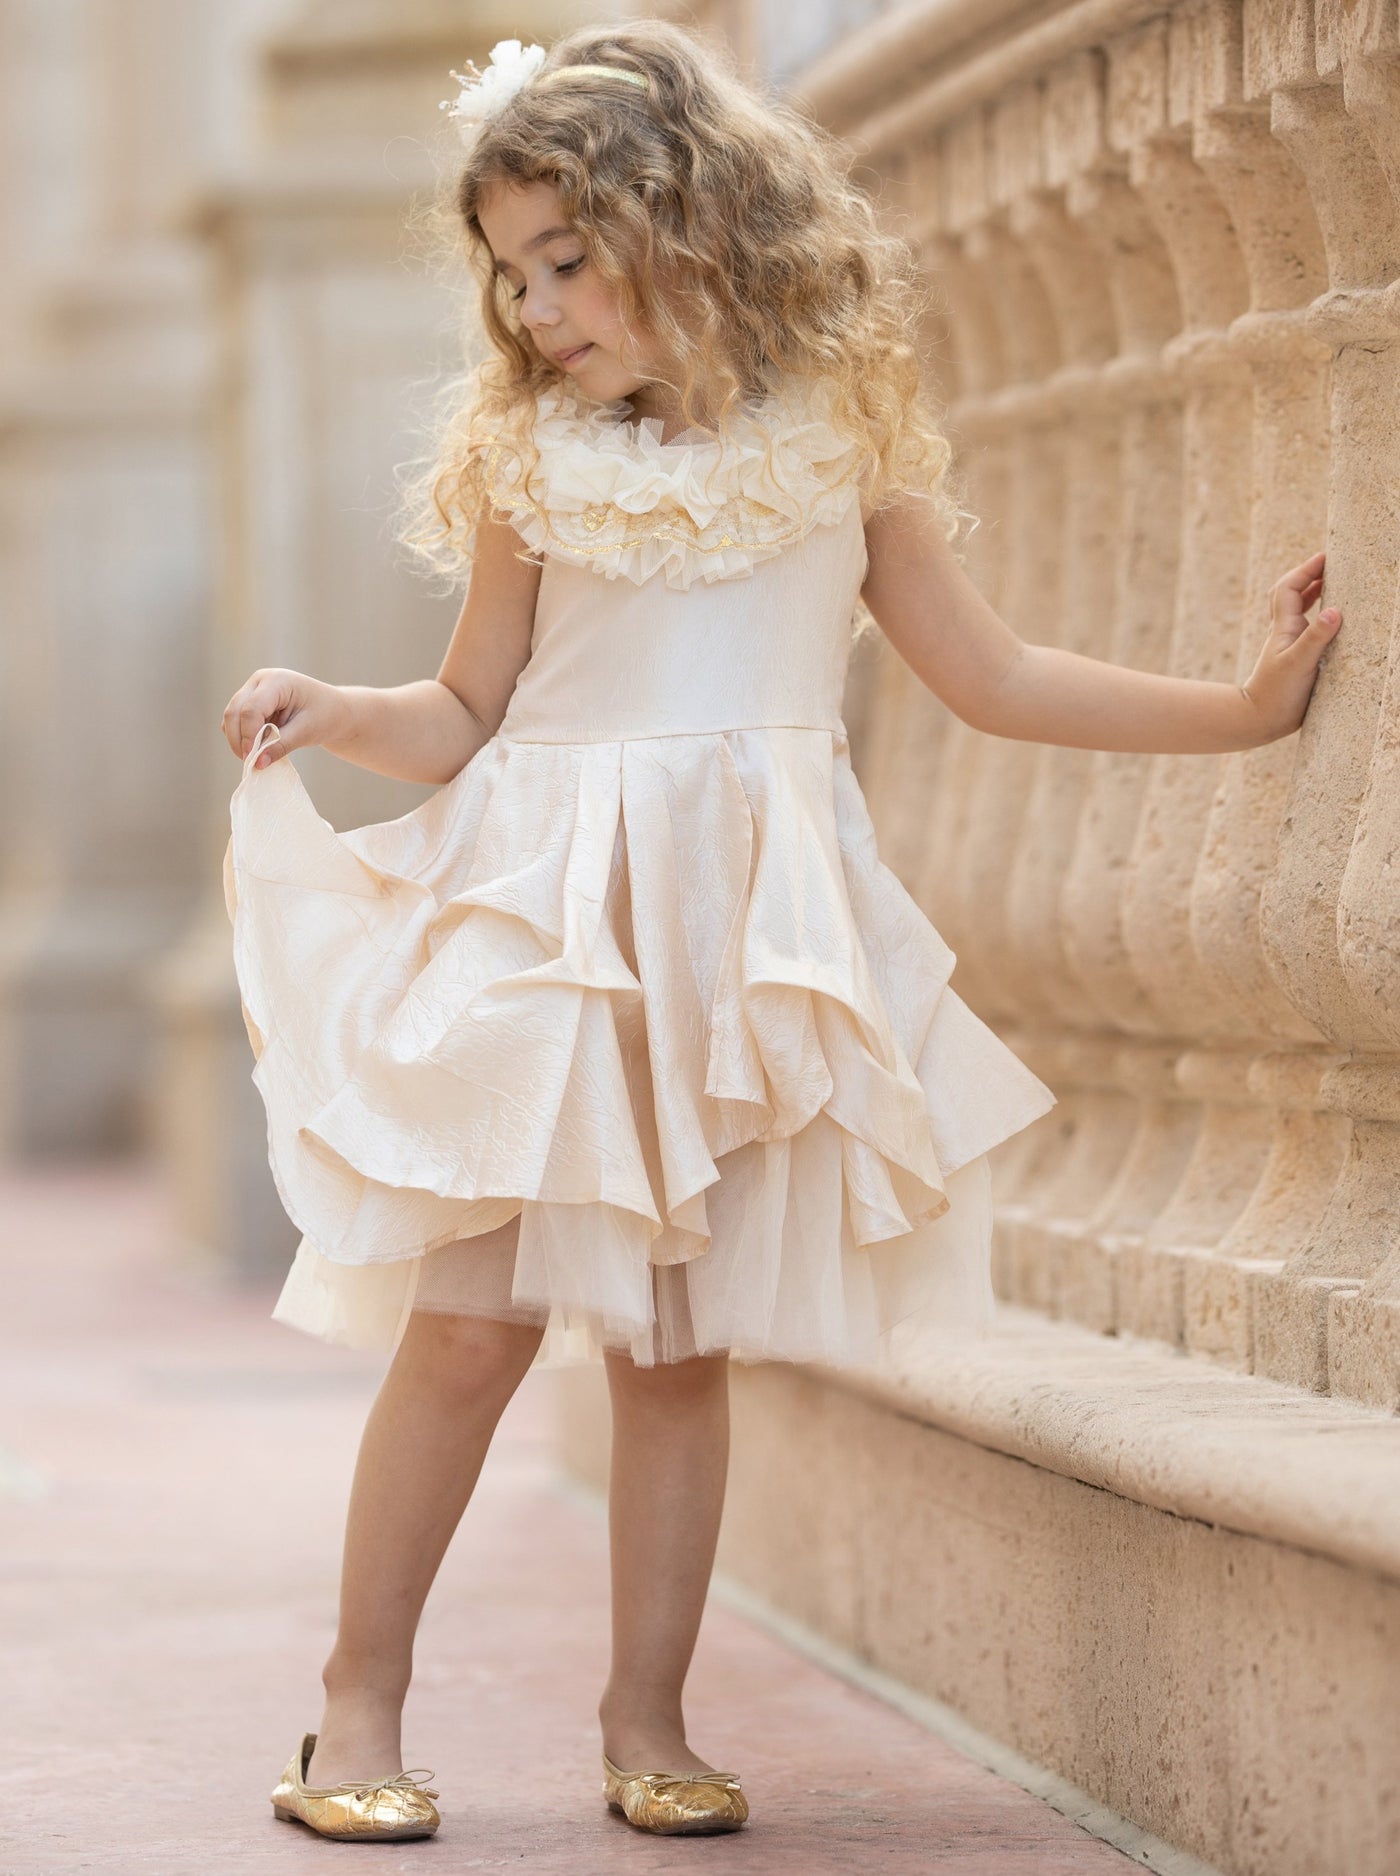 Girls Ruffled Lace Tulle Layer Dress - Champagne / 2T - Girls Spring Dressy Dress